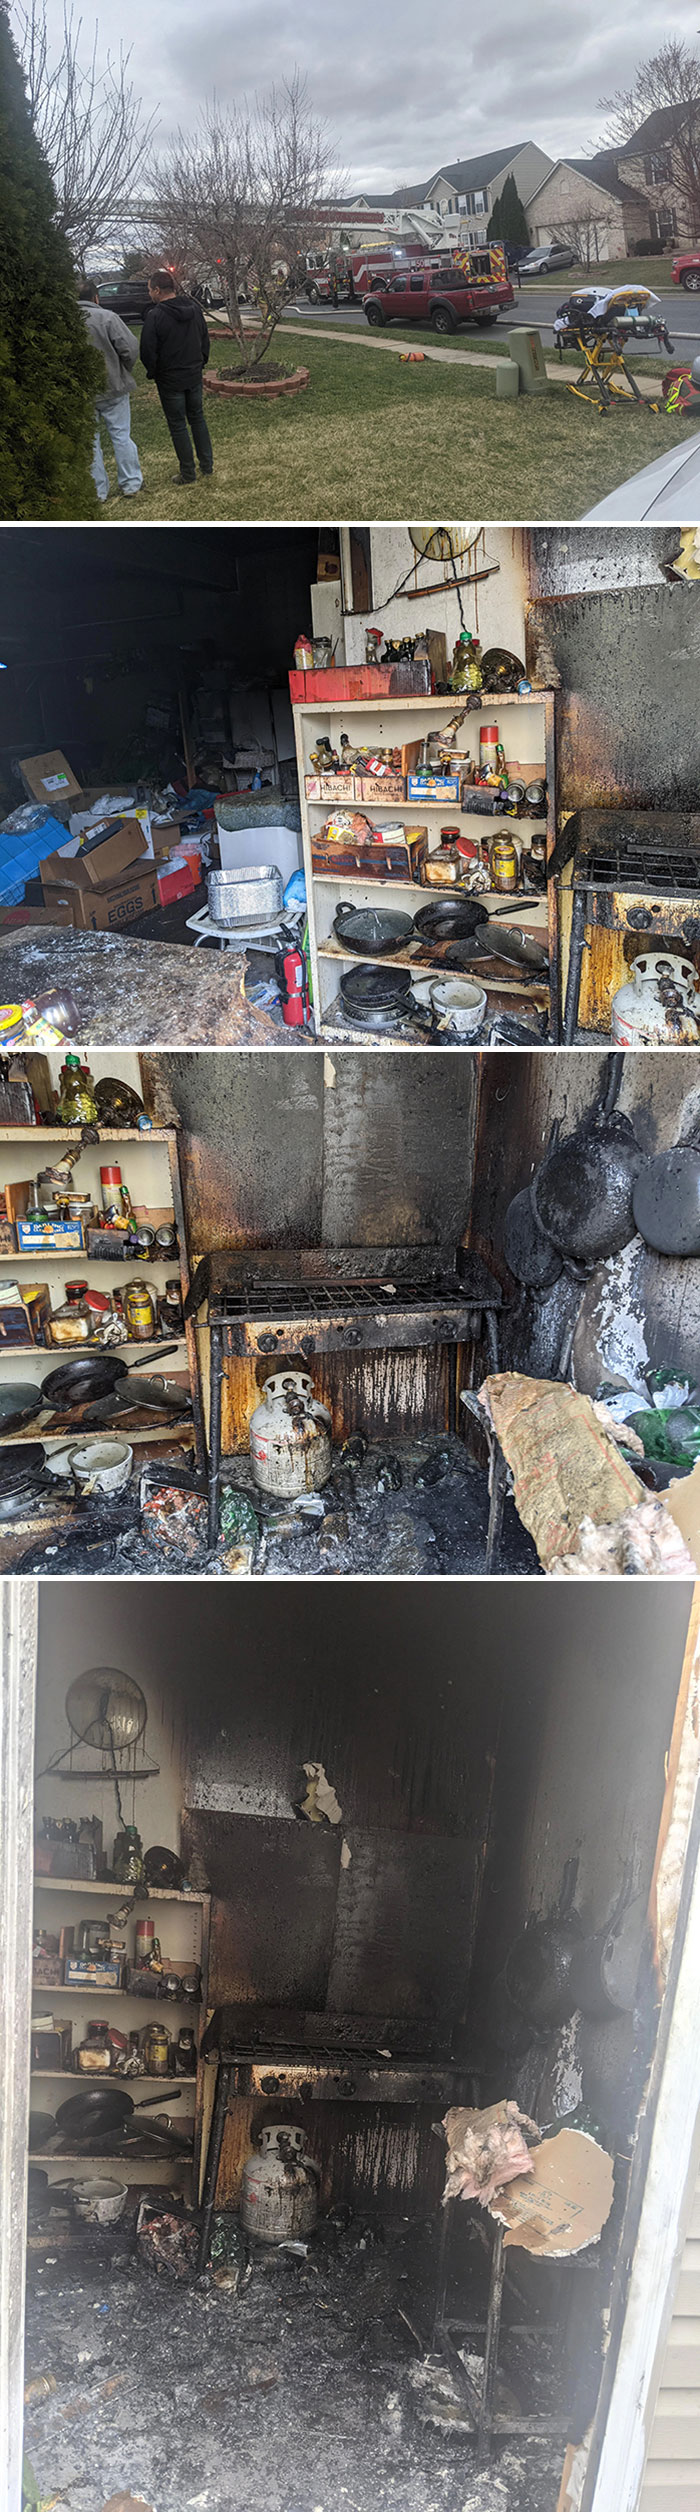 My Neighbor Likes To Grill In The Garage Or Her Home With No Exhaust. The Second Time She Is Almost Burning Her House Down